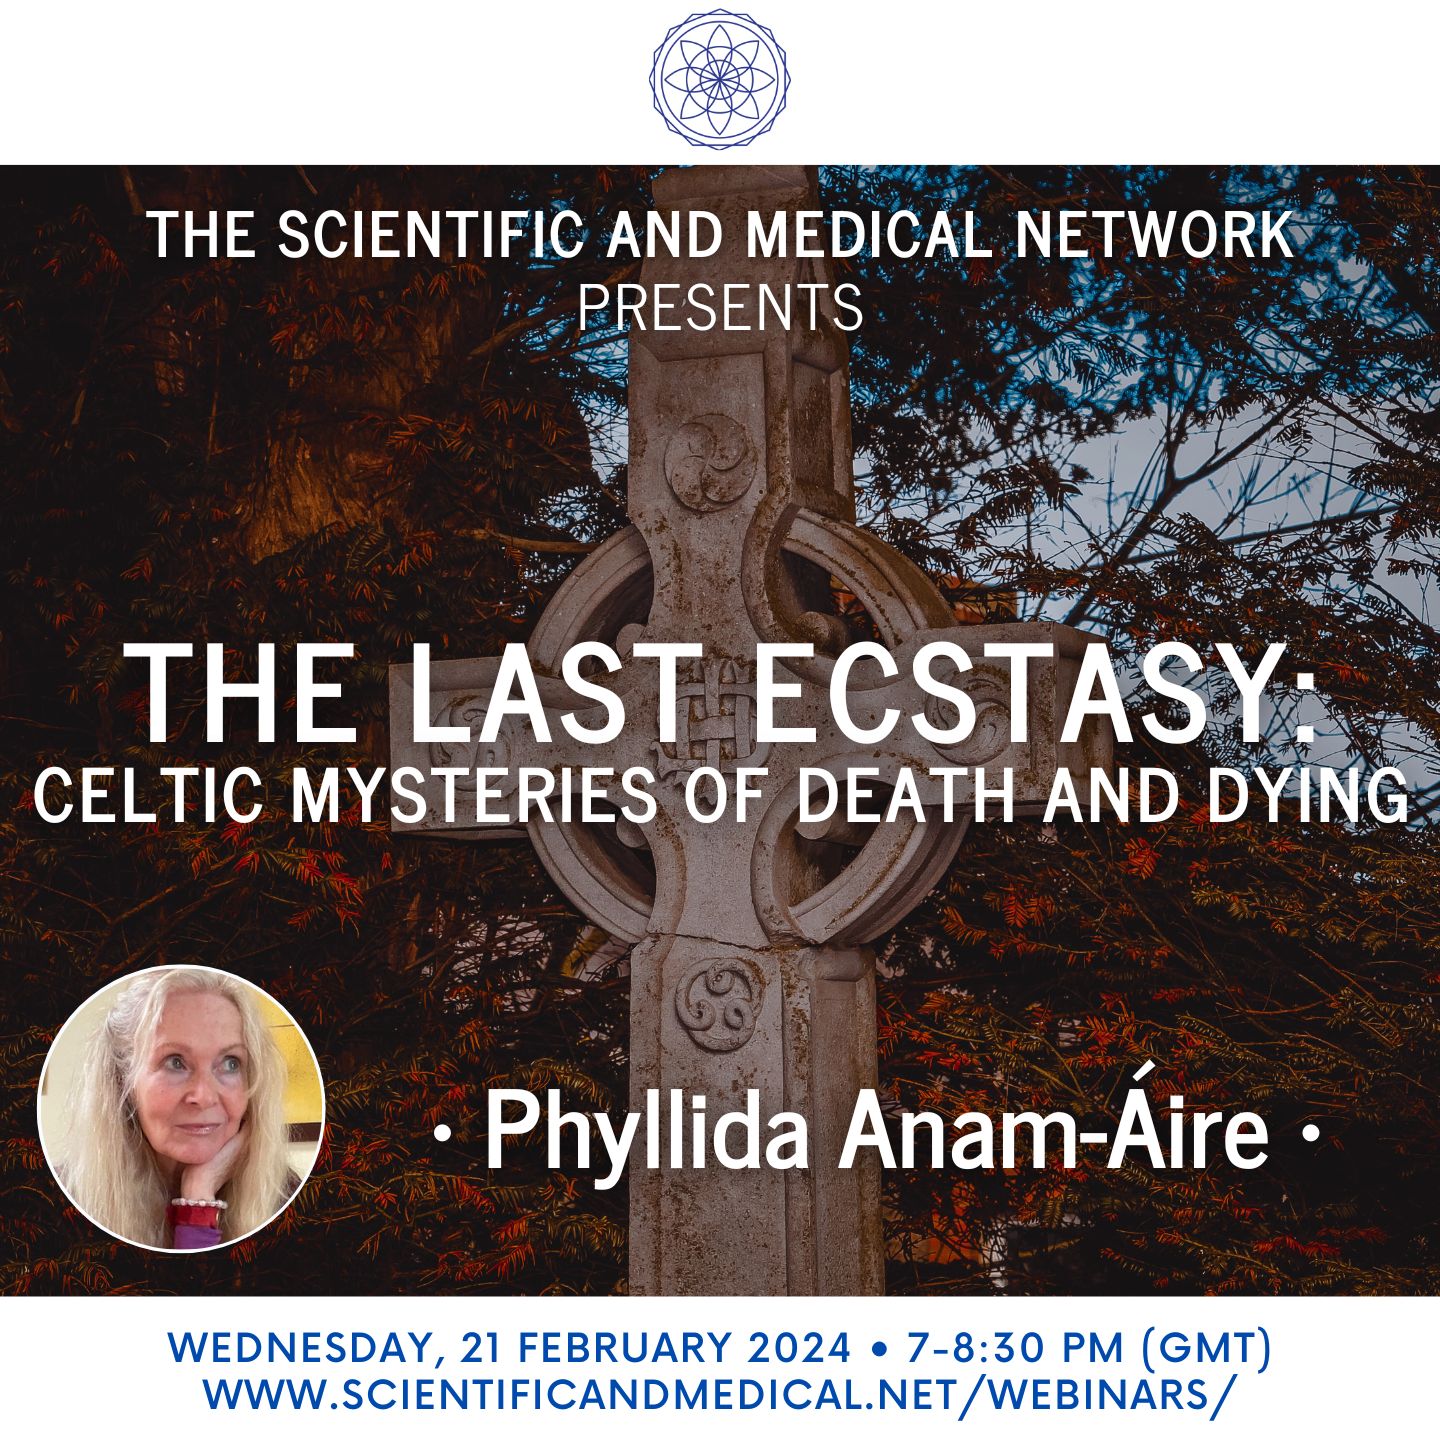 Phyllida Anamaire – The Last Ecstasy Celtic Mysteries of Death and Dying